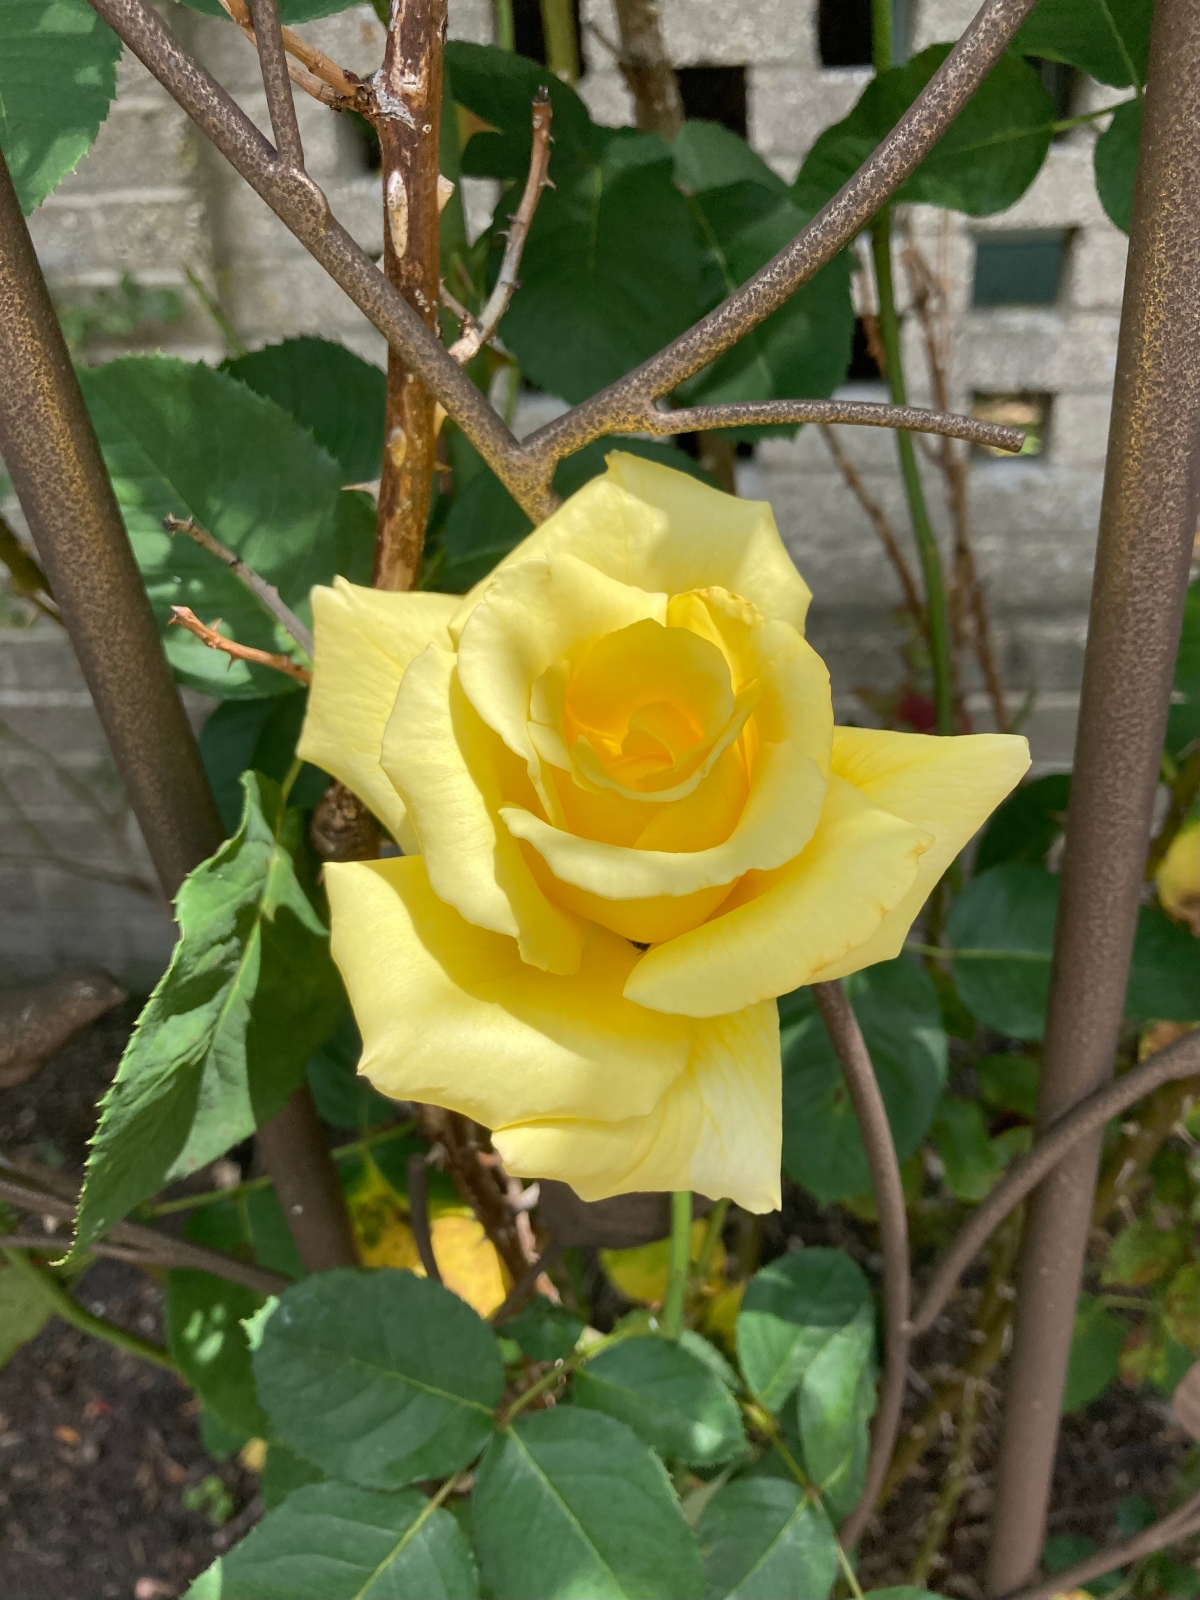 Close up photograph of single yellow rose in full bloom on a trellis